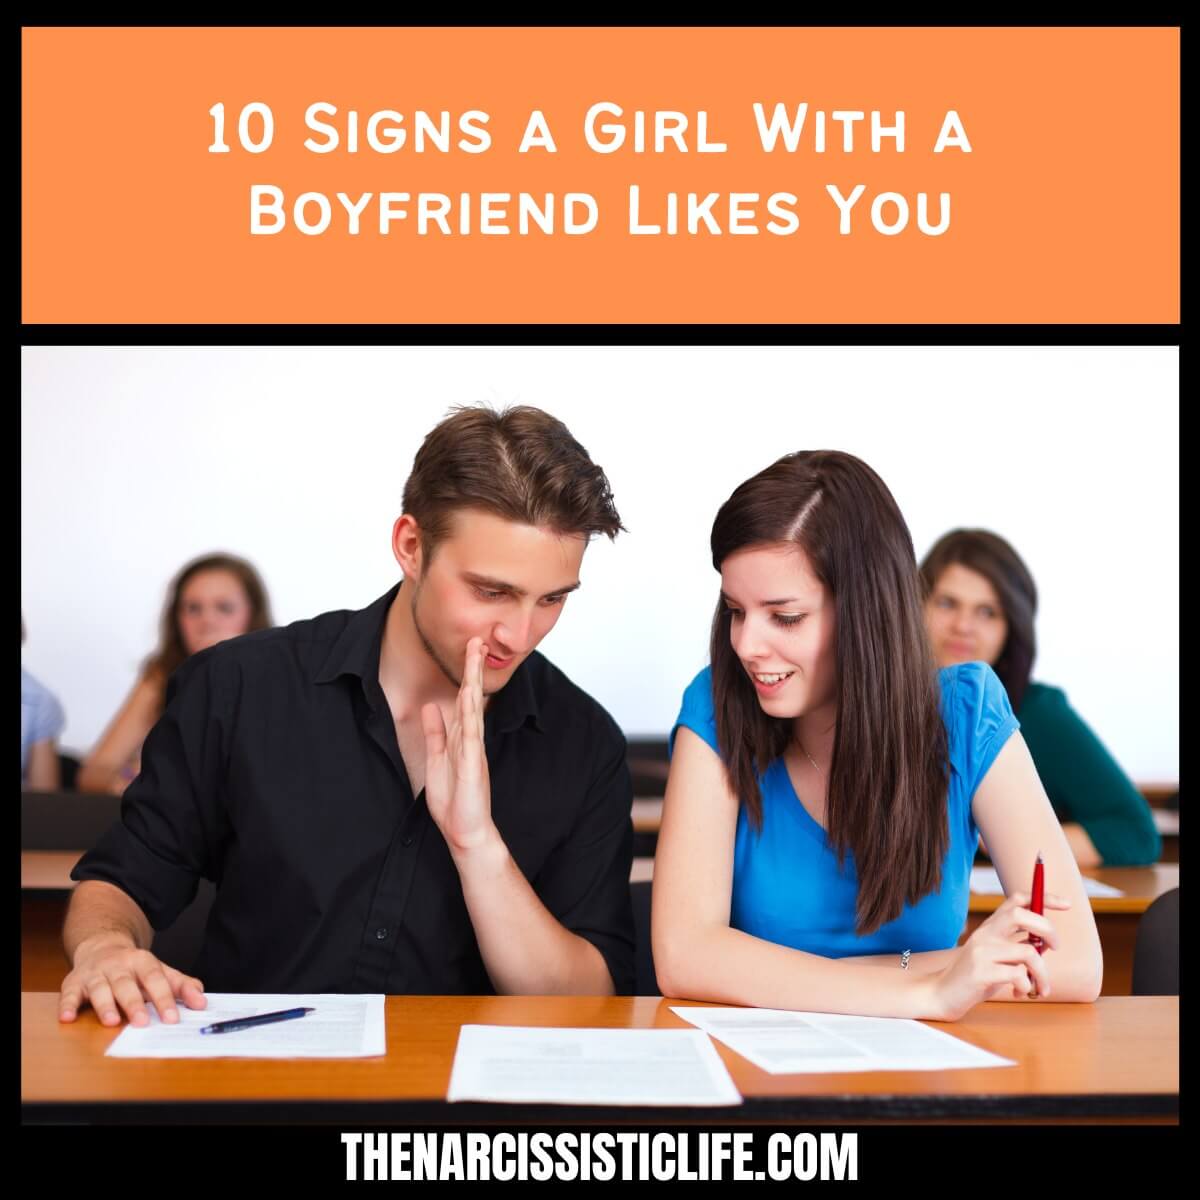 10 Signs a Girl With a Boyfriend Likes You